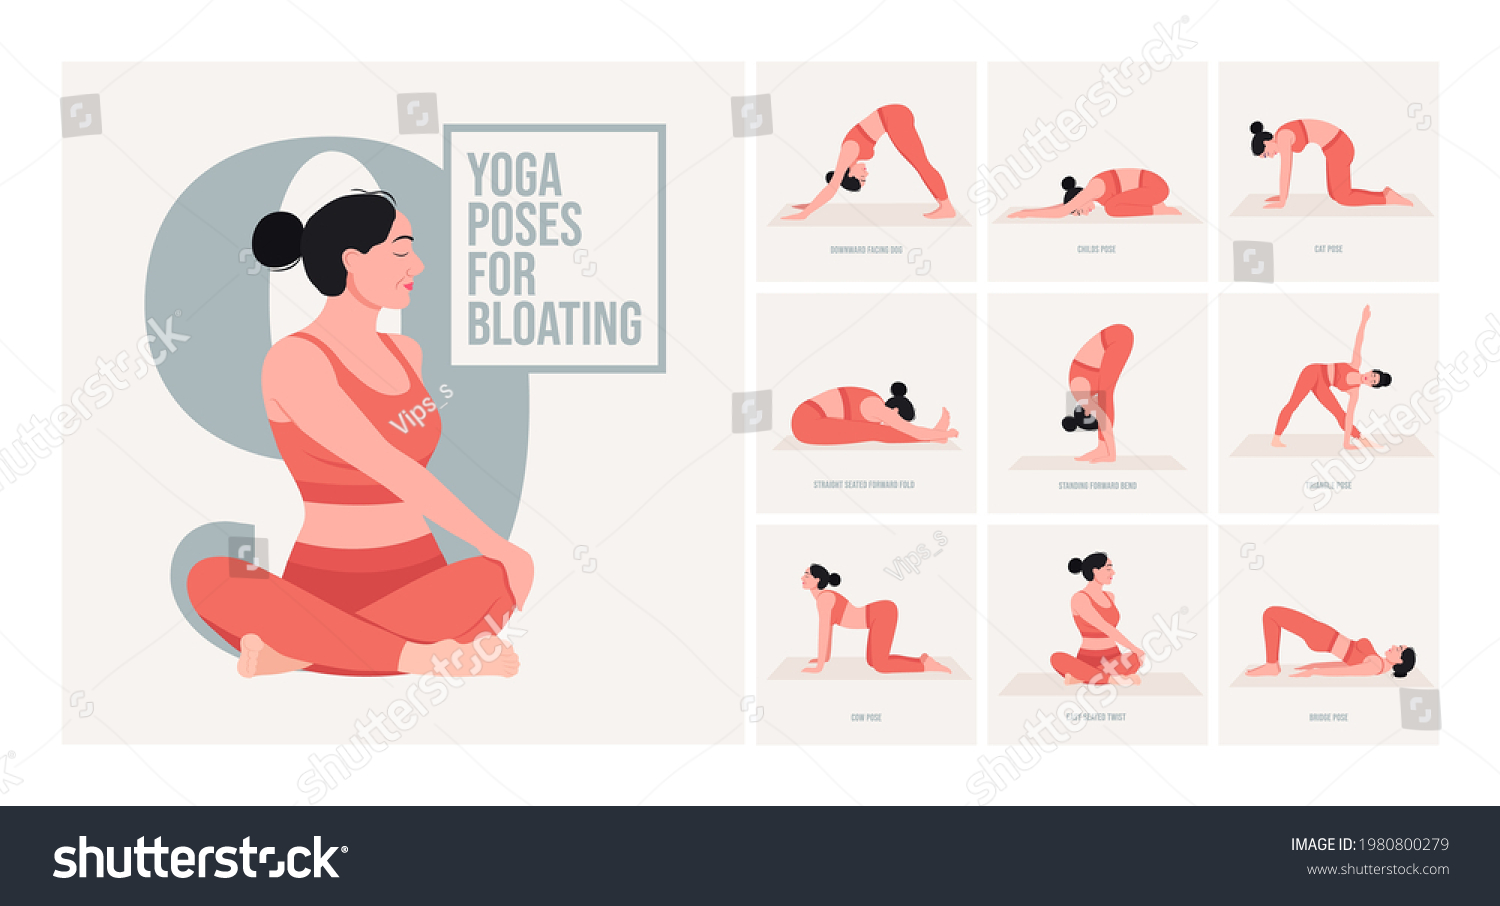 Yoga Poses For Bloating Young Woman Practicing Royalty Free Stock Vector 1980800279 